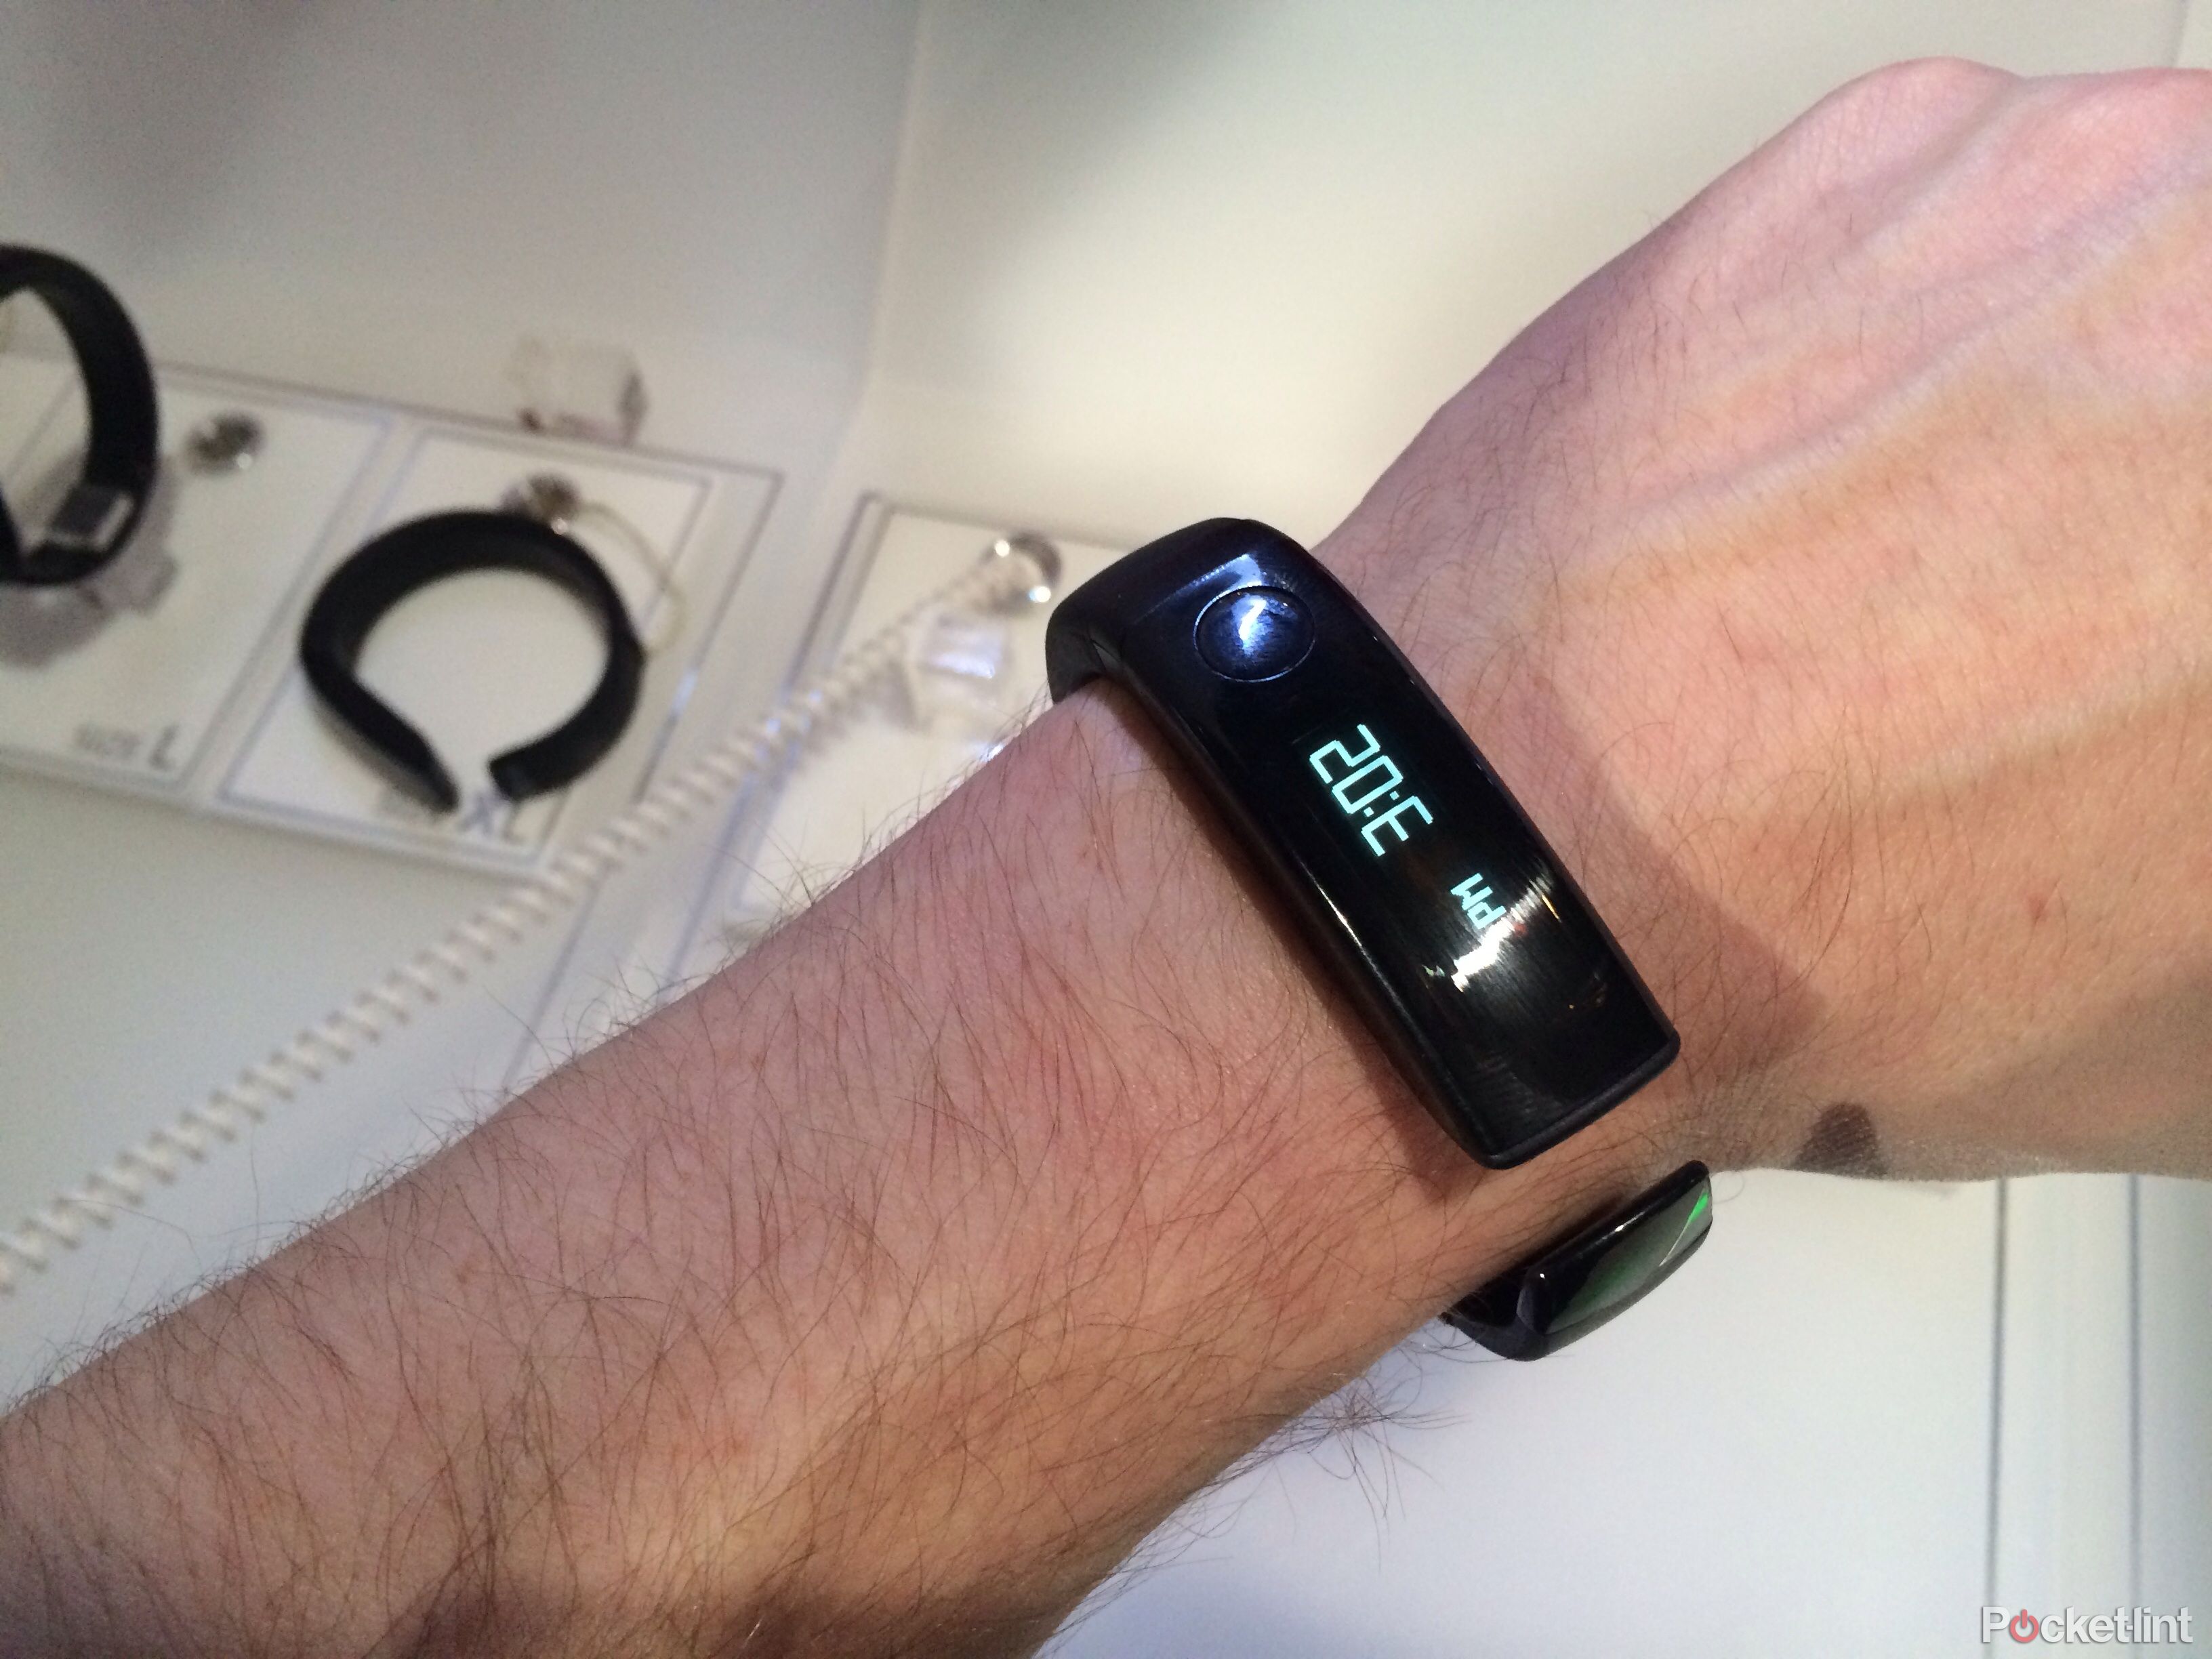 lg lifeband touch and heart rate earphones to hit uk in april company confirms image 1